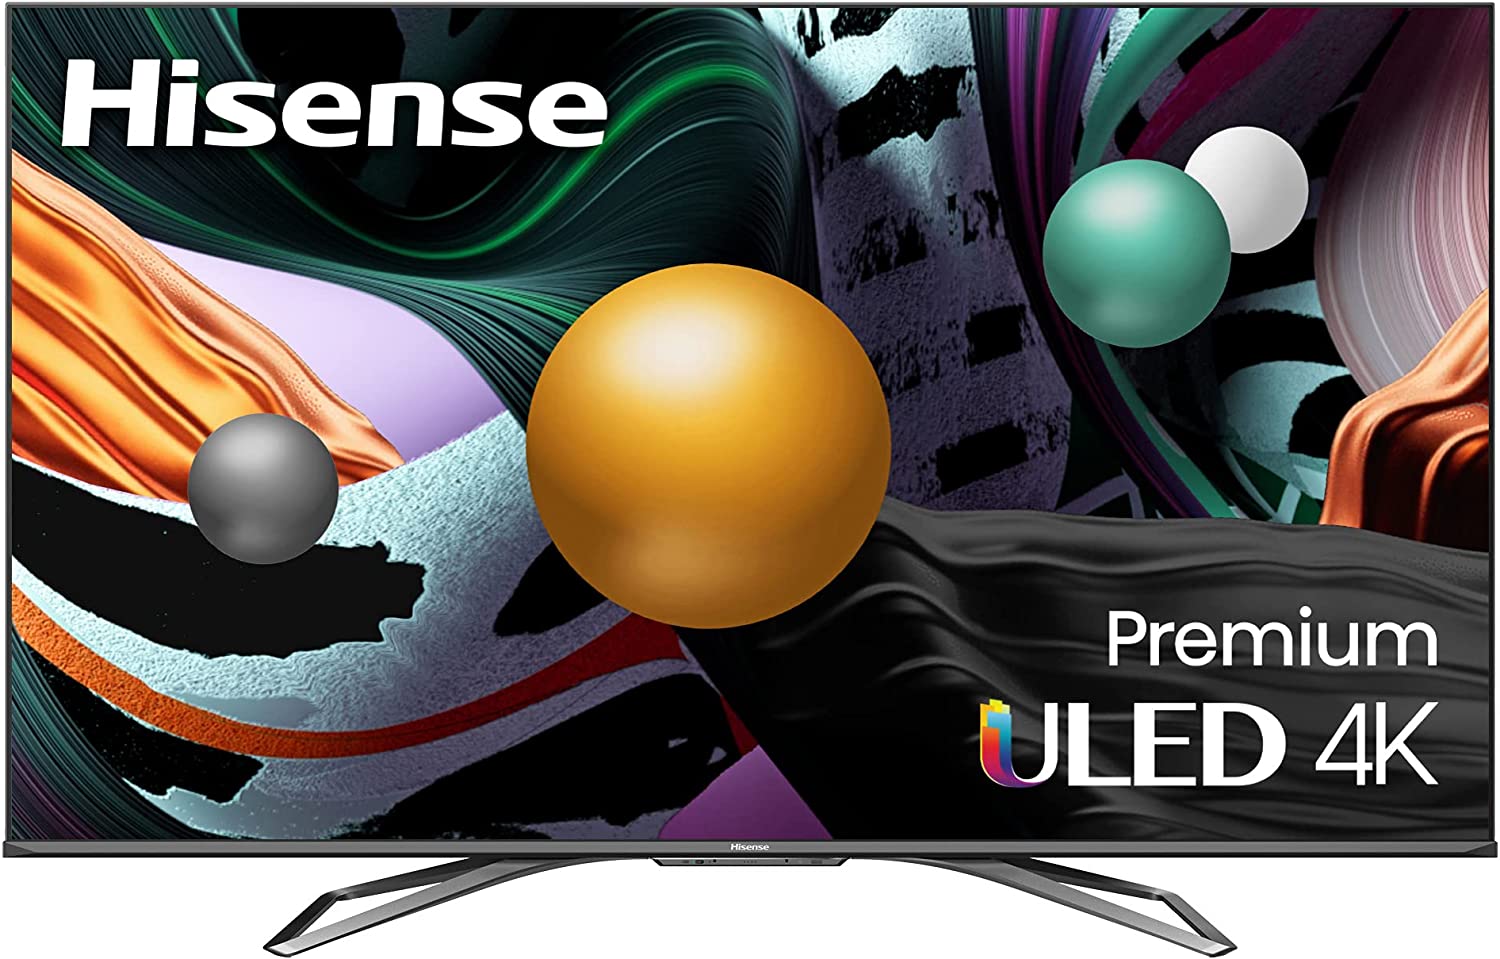 The finest 4K TVs for crisp, bright visuals and consistent streaming